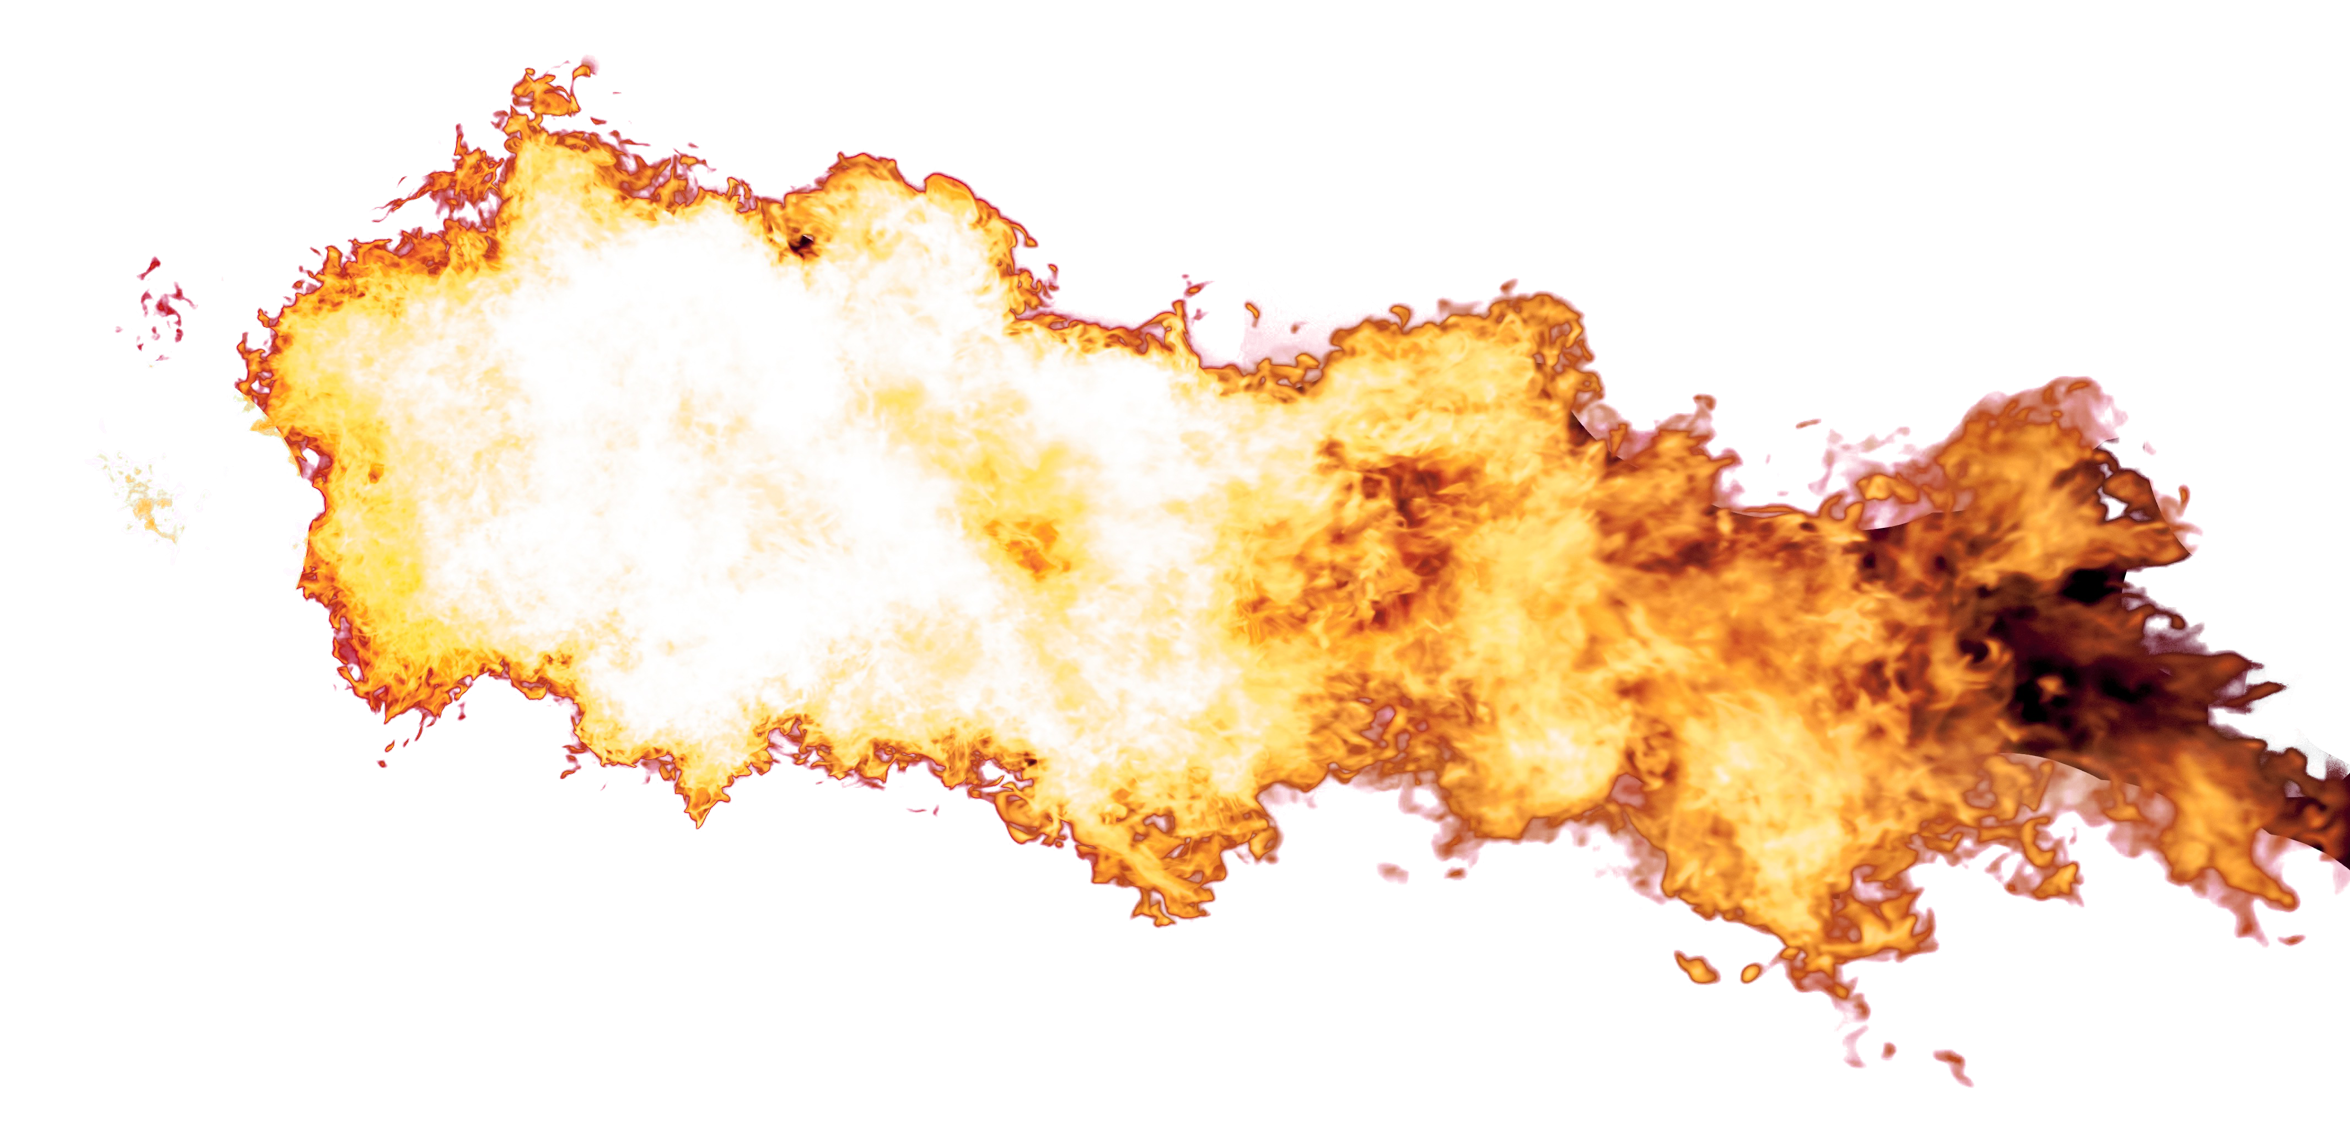 Fire png transparent images. Flames clipart real flame